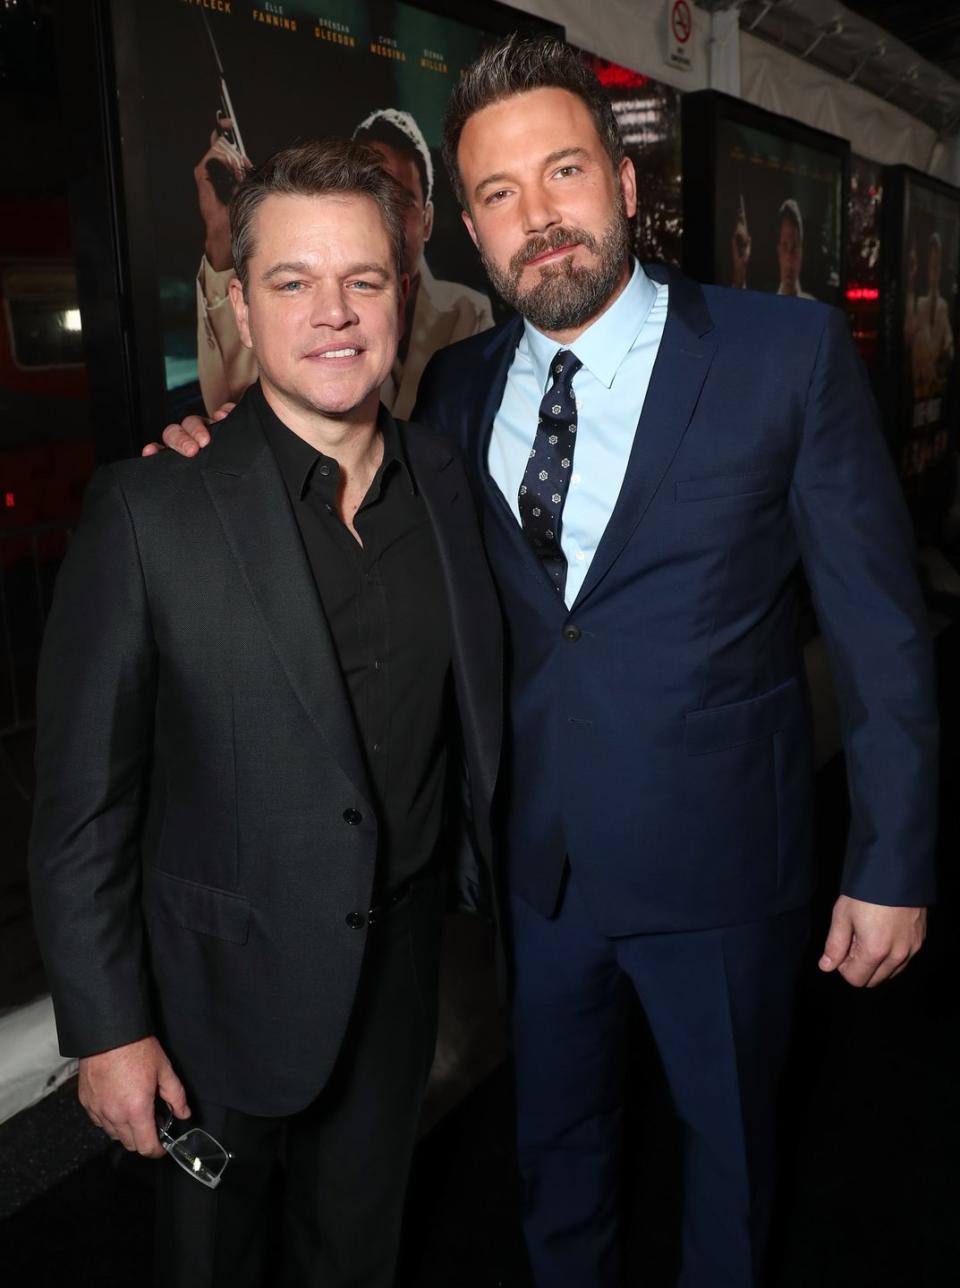 <p>One of Hollywood's most well-known pairs of BFFs, Matt Damon and Ben Affleck, first crossed paths while attending Cambridge Rindge and Latin School in Boston for High School. Their story continued in Los Angeles, where they lived together right before collaborating on <em>Good Will Hunting</em>, the film that would ultimately change the trajectory of their careers.</p>